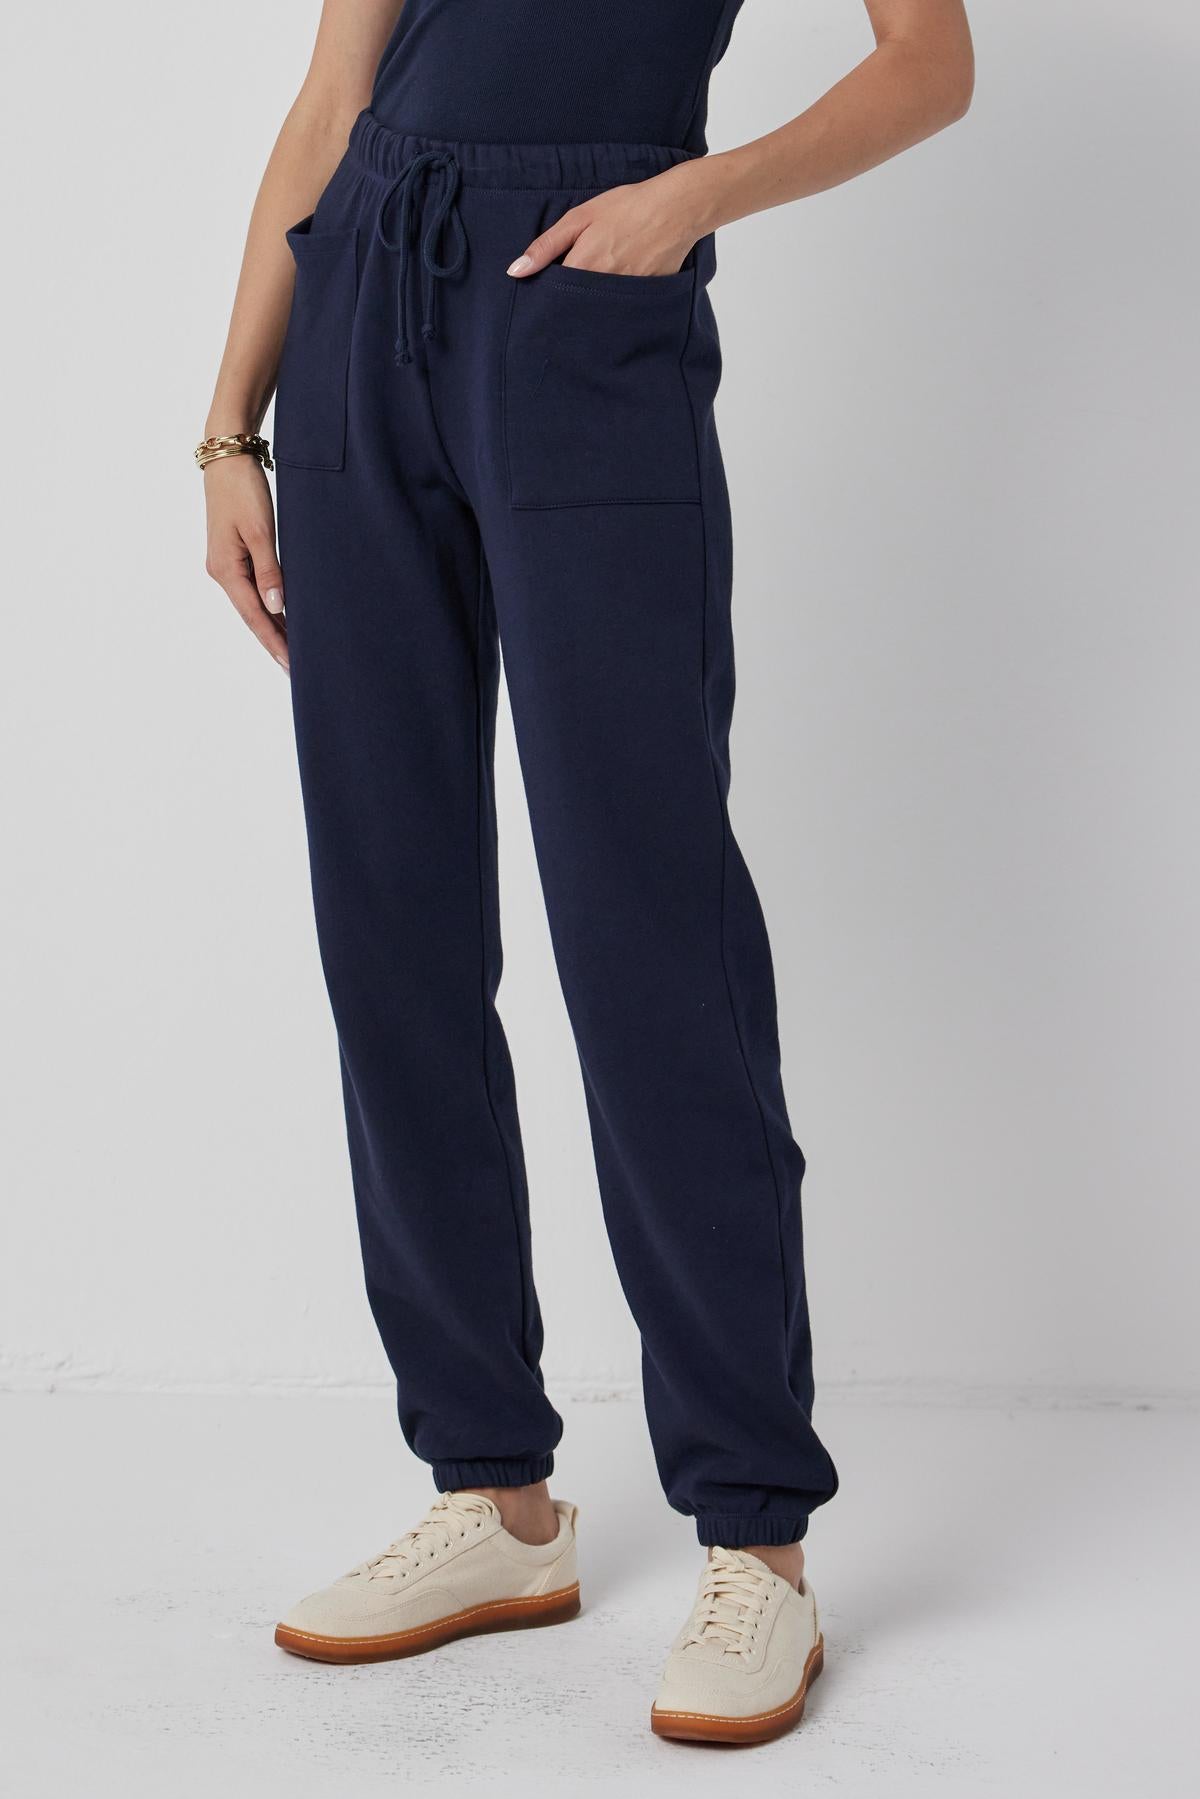 The model is wearing a Velvet by Jenny Graham WESTLAKE SWEATPANT with pockets.-36168729723073